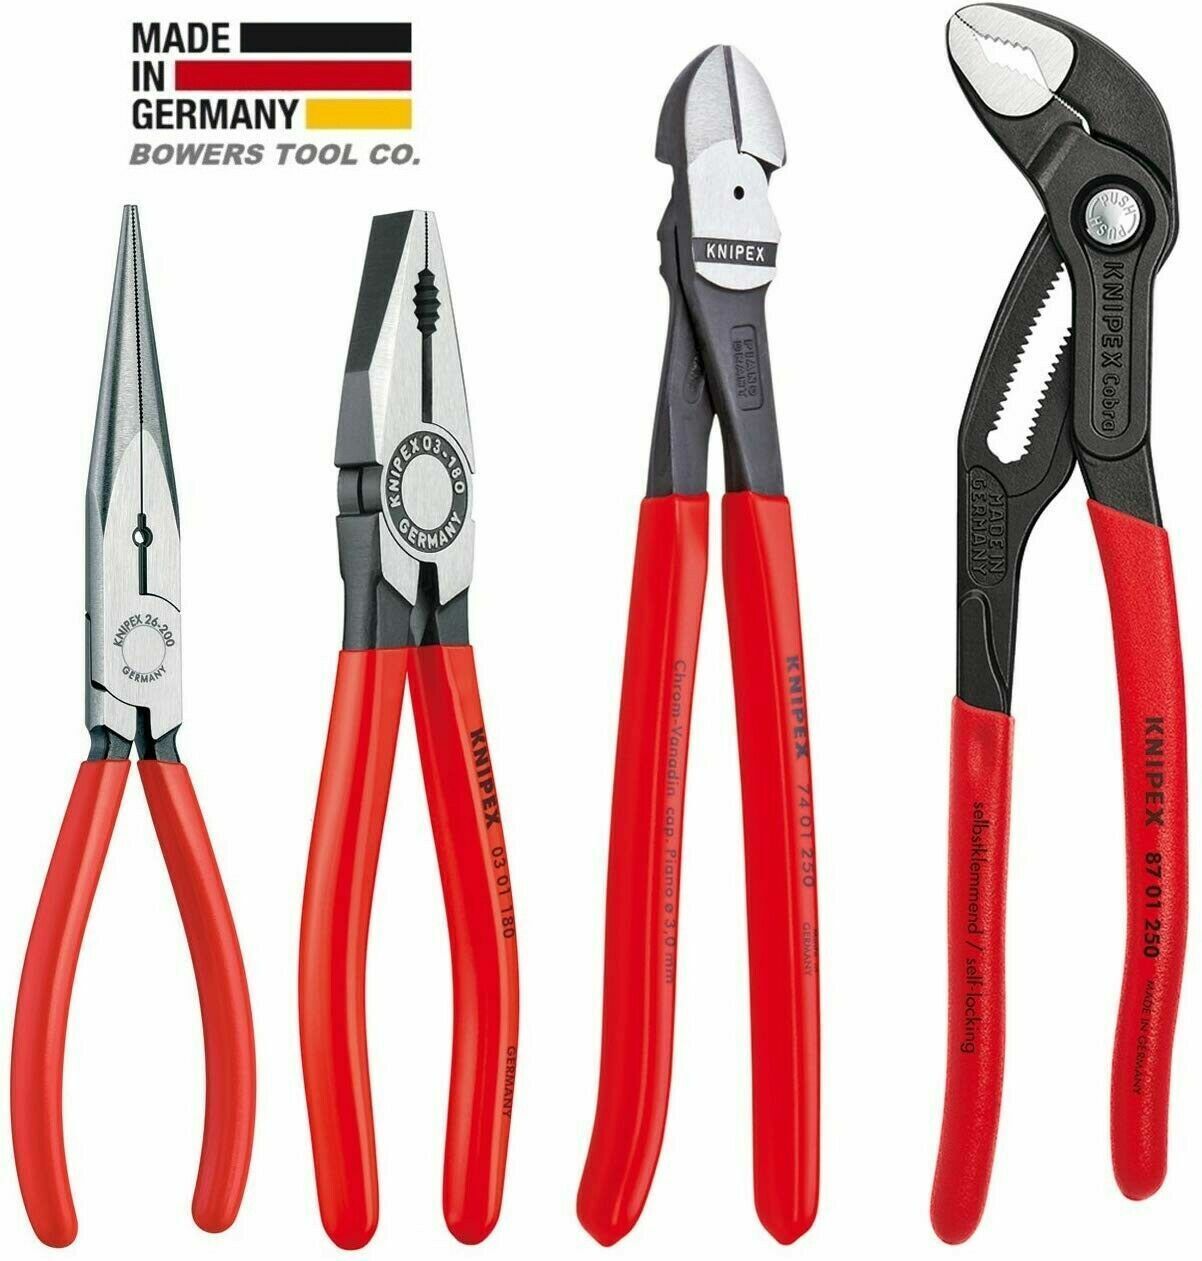 Primary image for Knipex 4pc Pliers Set Cobra, Cutter, Long Nose, Combination 9K008094 Plier NEW!